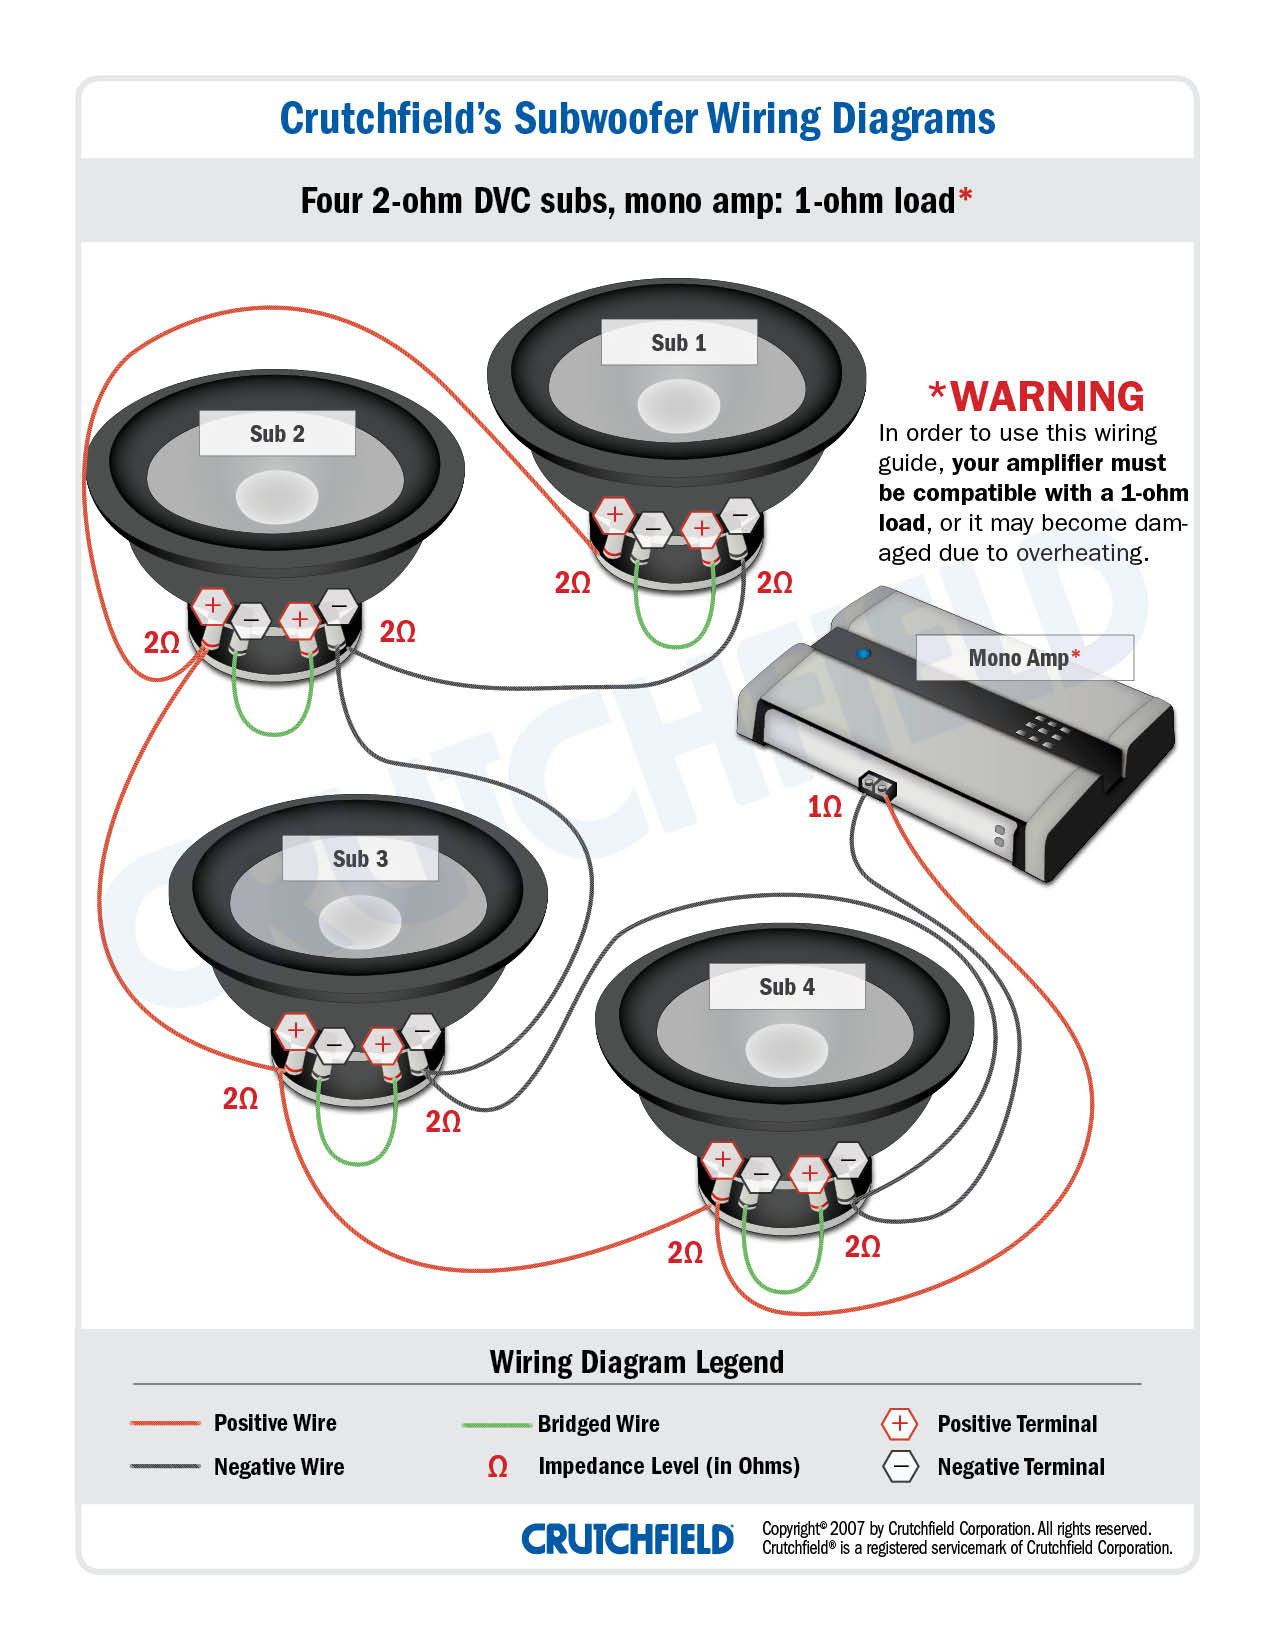 Subwoofer Wiring Diagrams — How To Wire Your Subs - Kicker Subwoofer Wiring Diagram